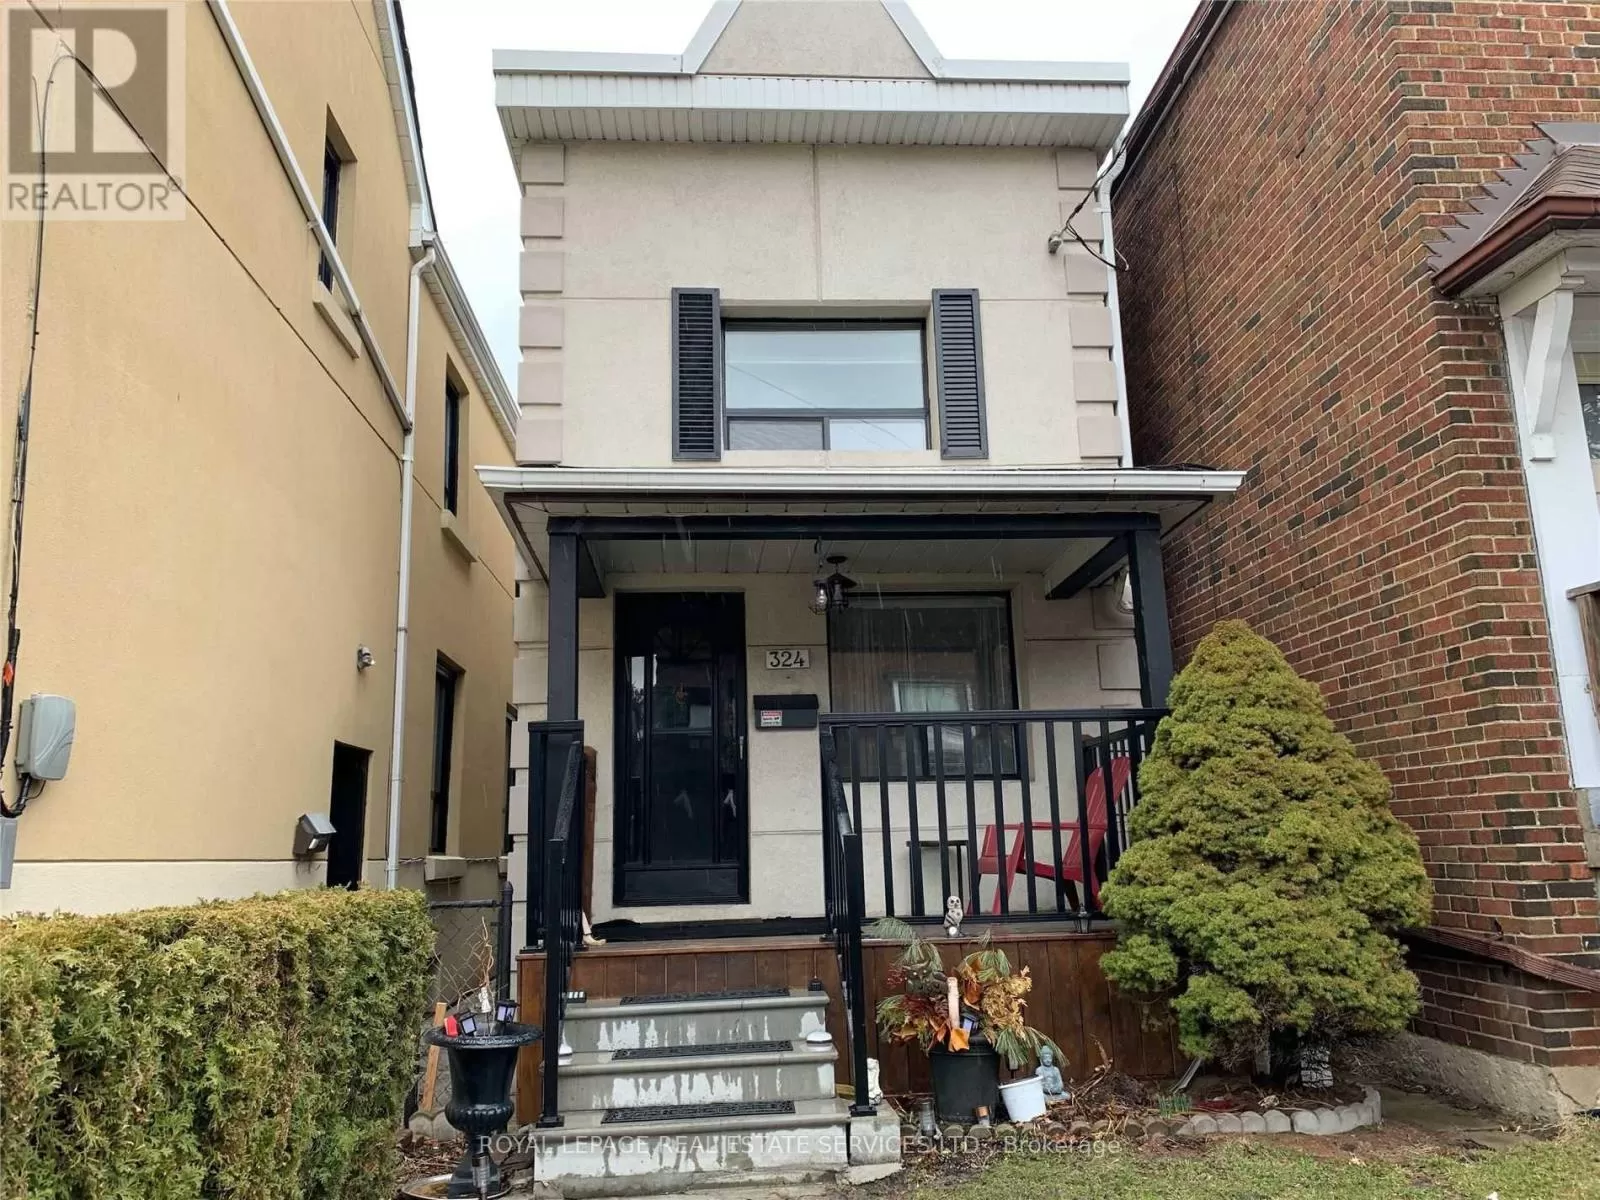 House for rent: 324 St. Johns Road, Toronto, Ontario M6S 2K4